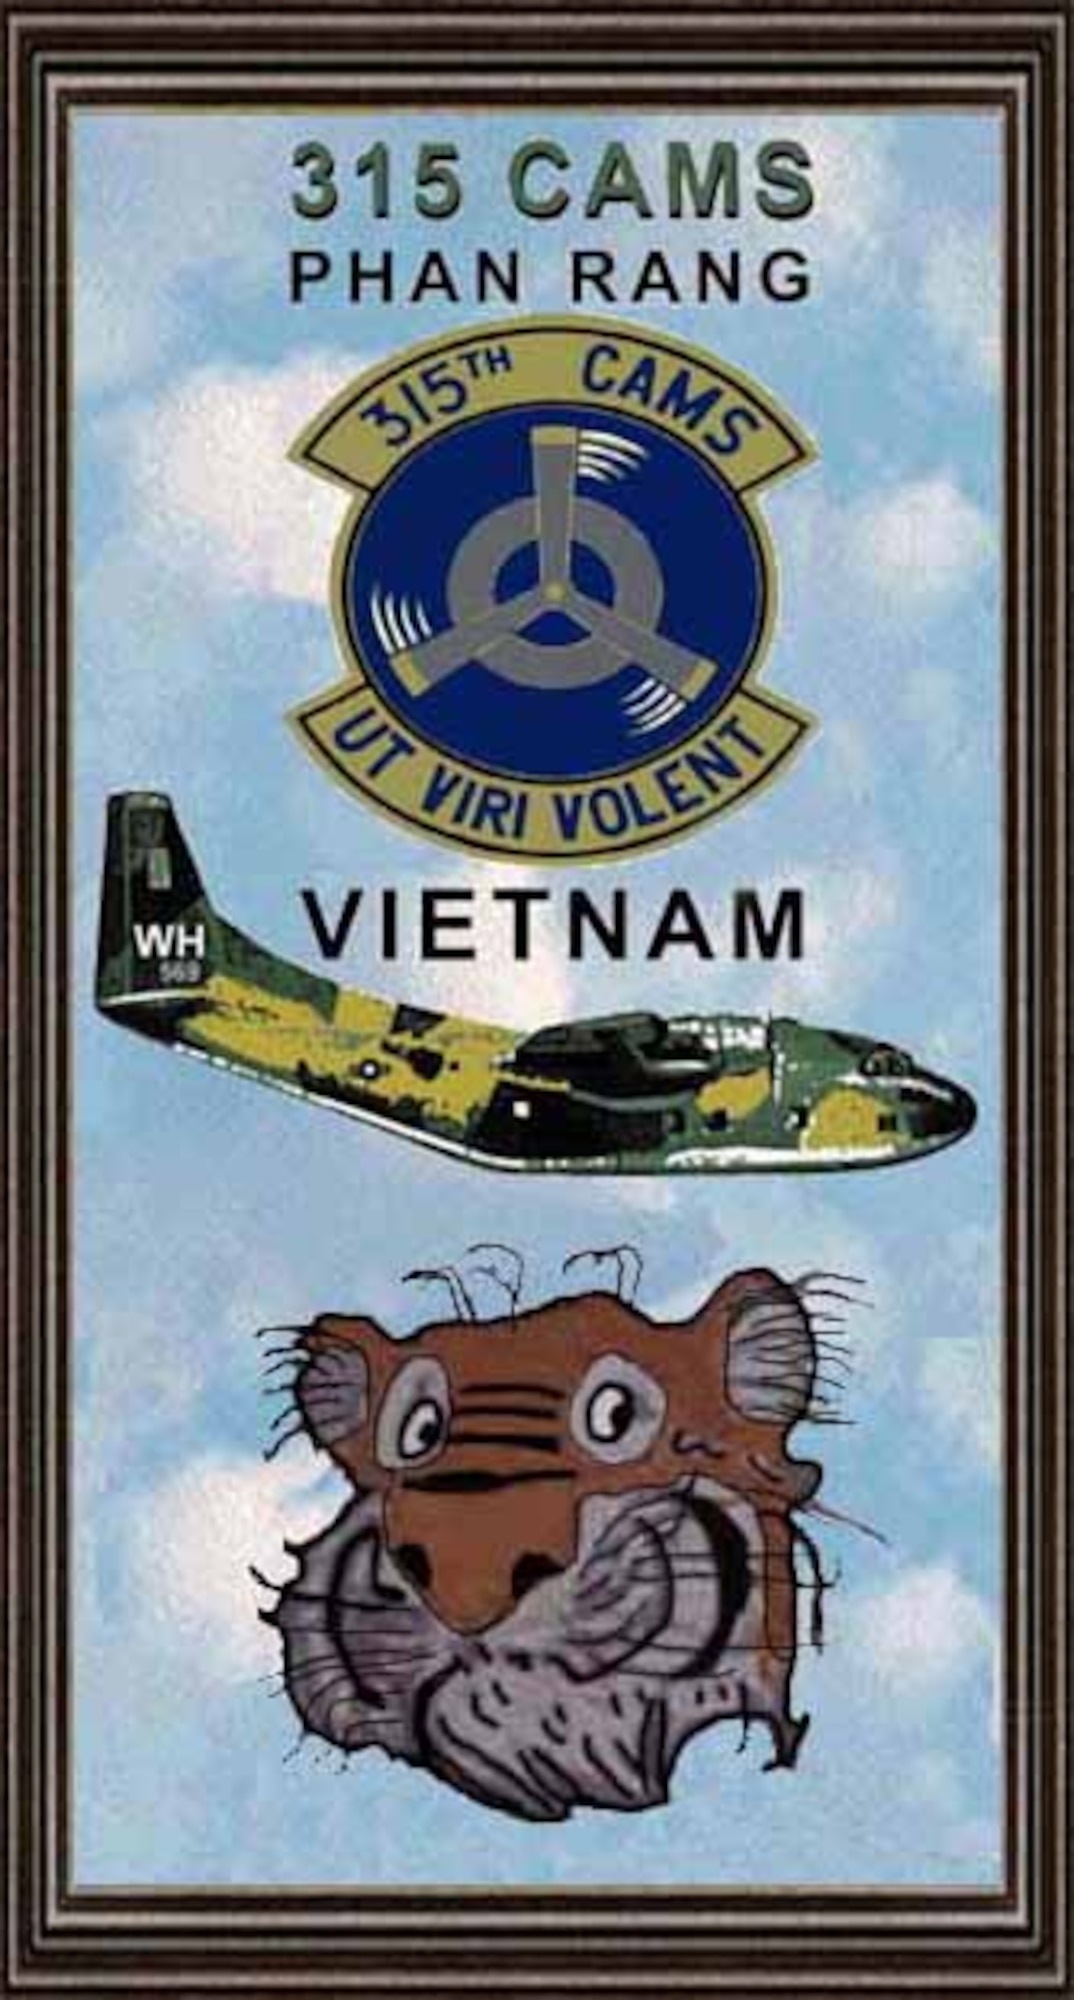 The emblem of the 315th Consolidated Aircraft Maintenance Squadron (CAMS) pictured above one of the workhorses of the Vietnam War, Fairchild's C-123 Provider.  The Latin motto "Ut Viri Volent", located below the spinning three bladed propellor, translates to "That Men May Fly".  (Photograph courtesy of Mike Vogel, 315 SOW/CAMS)